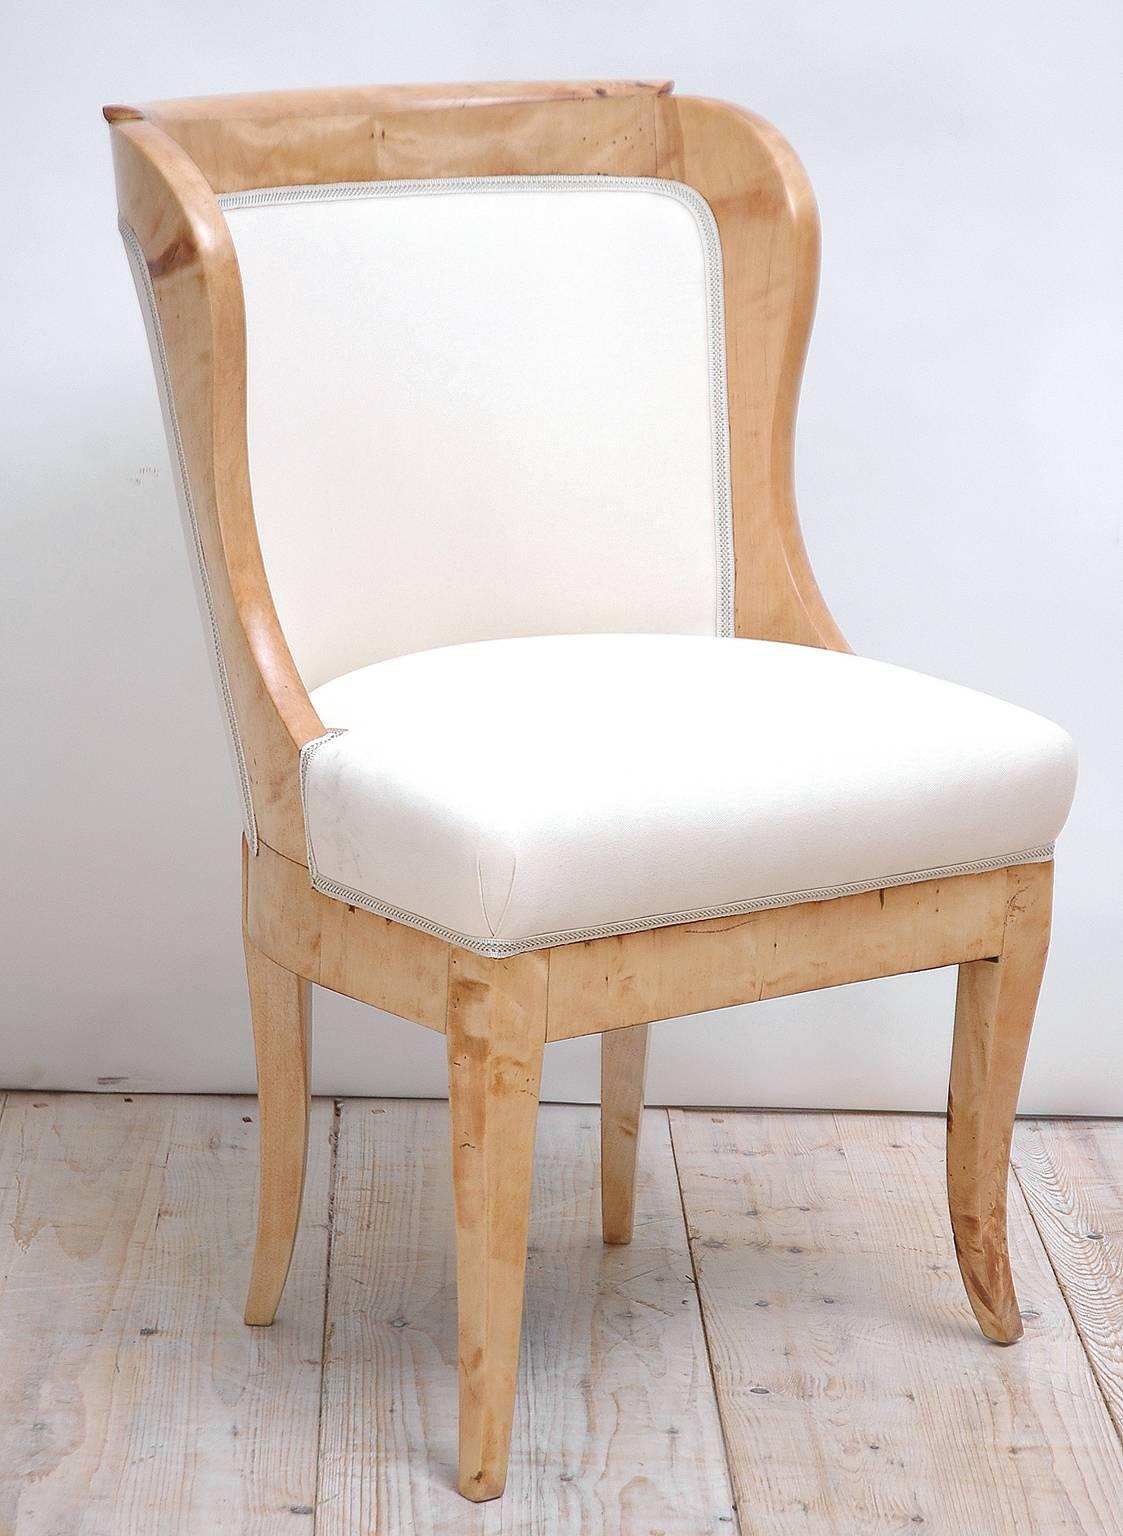 A beautifully proportioned Karl Johan/Biedermeier chair with rounded gondola back and tapered saber legs in a light birch with newly upholstered seat, interior and exterior back in a cream-colored Robert Allen cotton twill with Beacon Hill gimp,